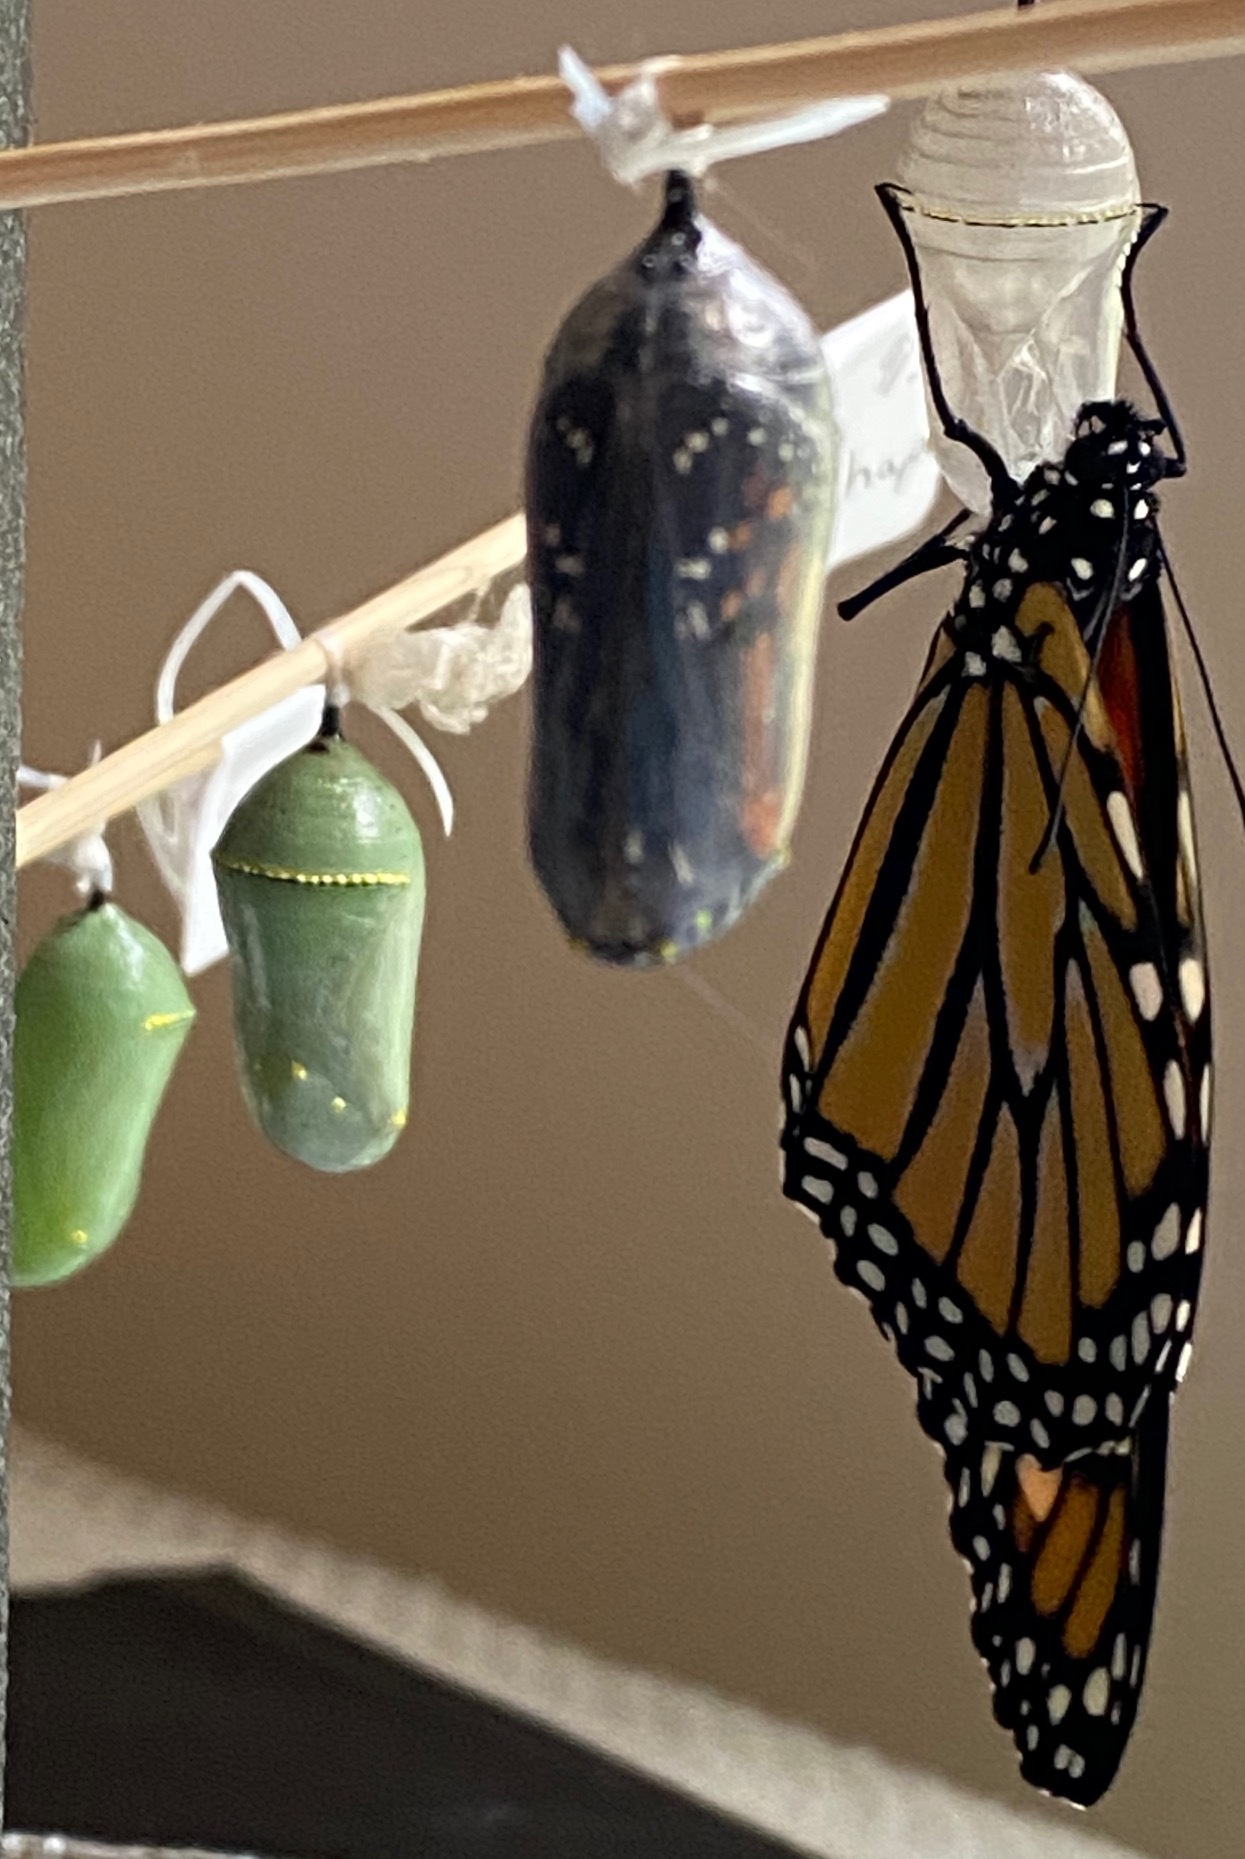 Monarchwatch.com helped Cindy Warne of Sag Harbor raise 24 Monarchs from larvae. Friends gave them names like “Frida Khalo” and “El Chapo” before watching them shed their skin and fly off to Mexico.